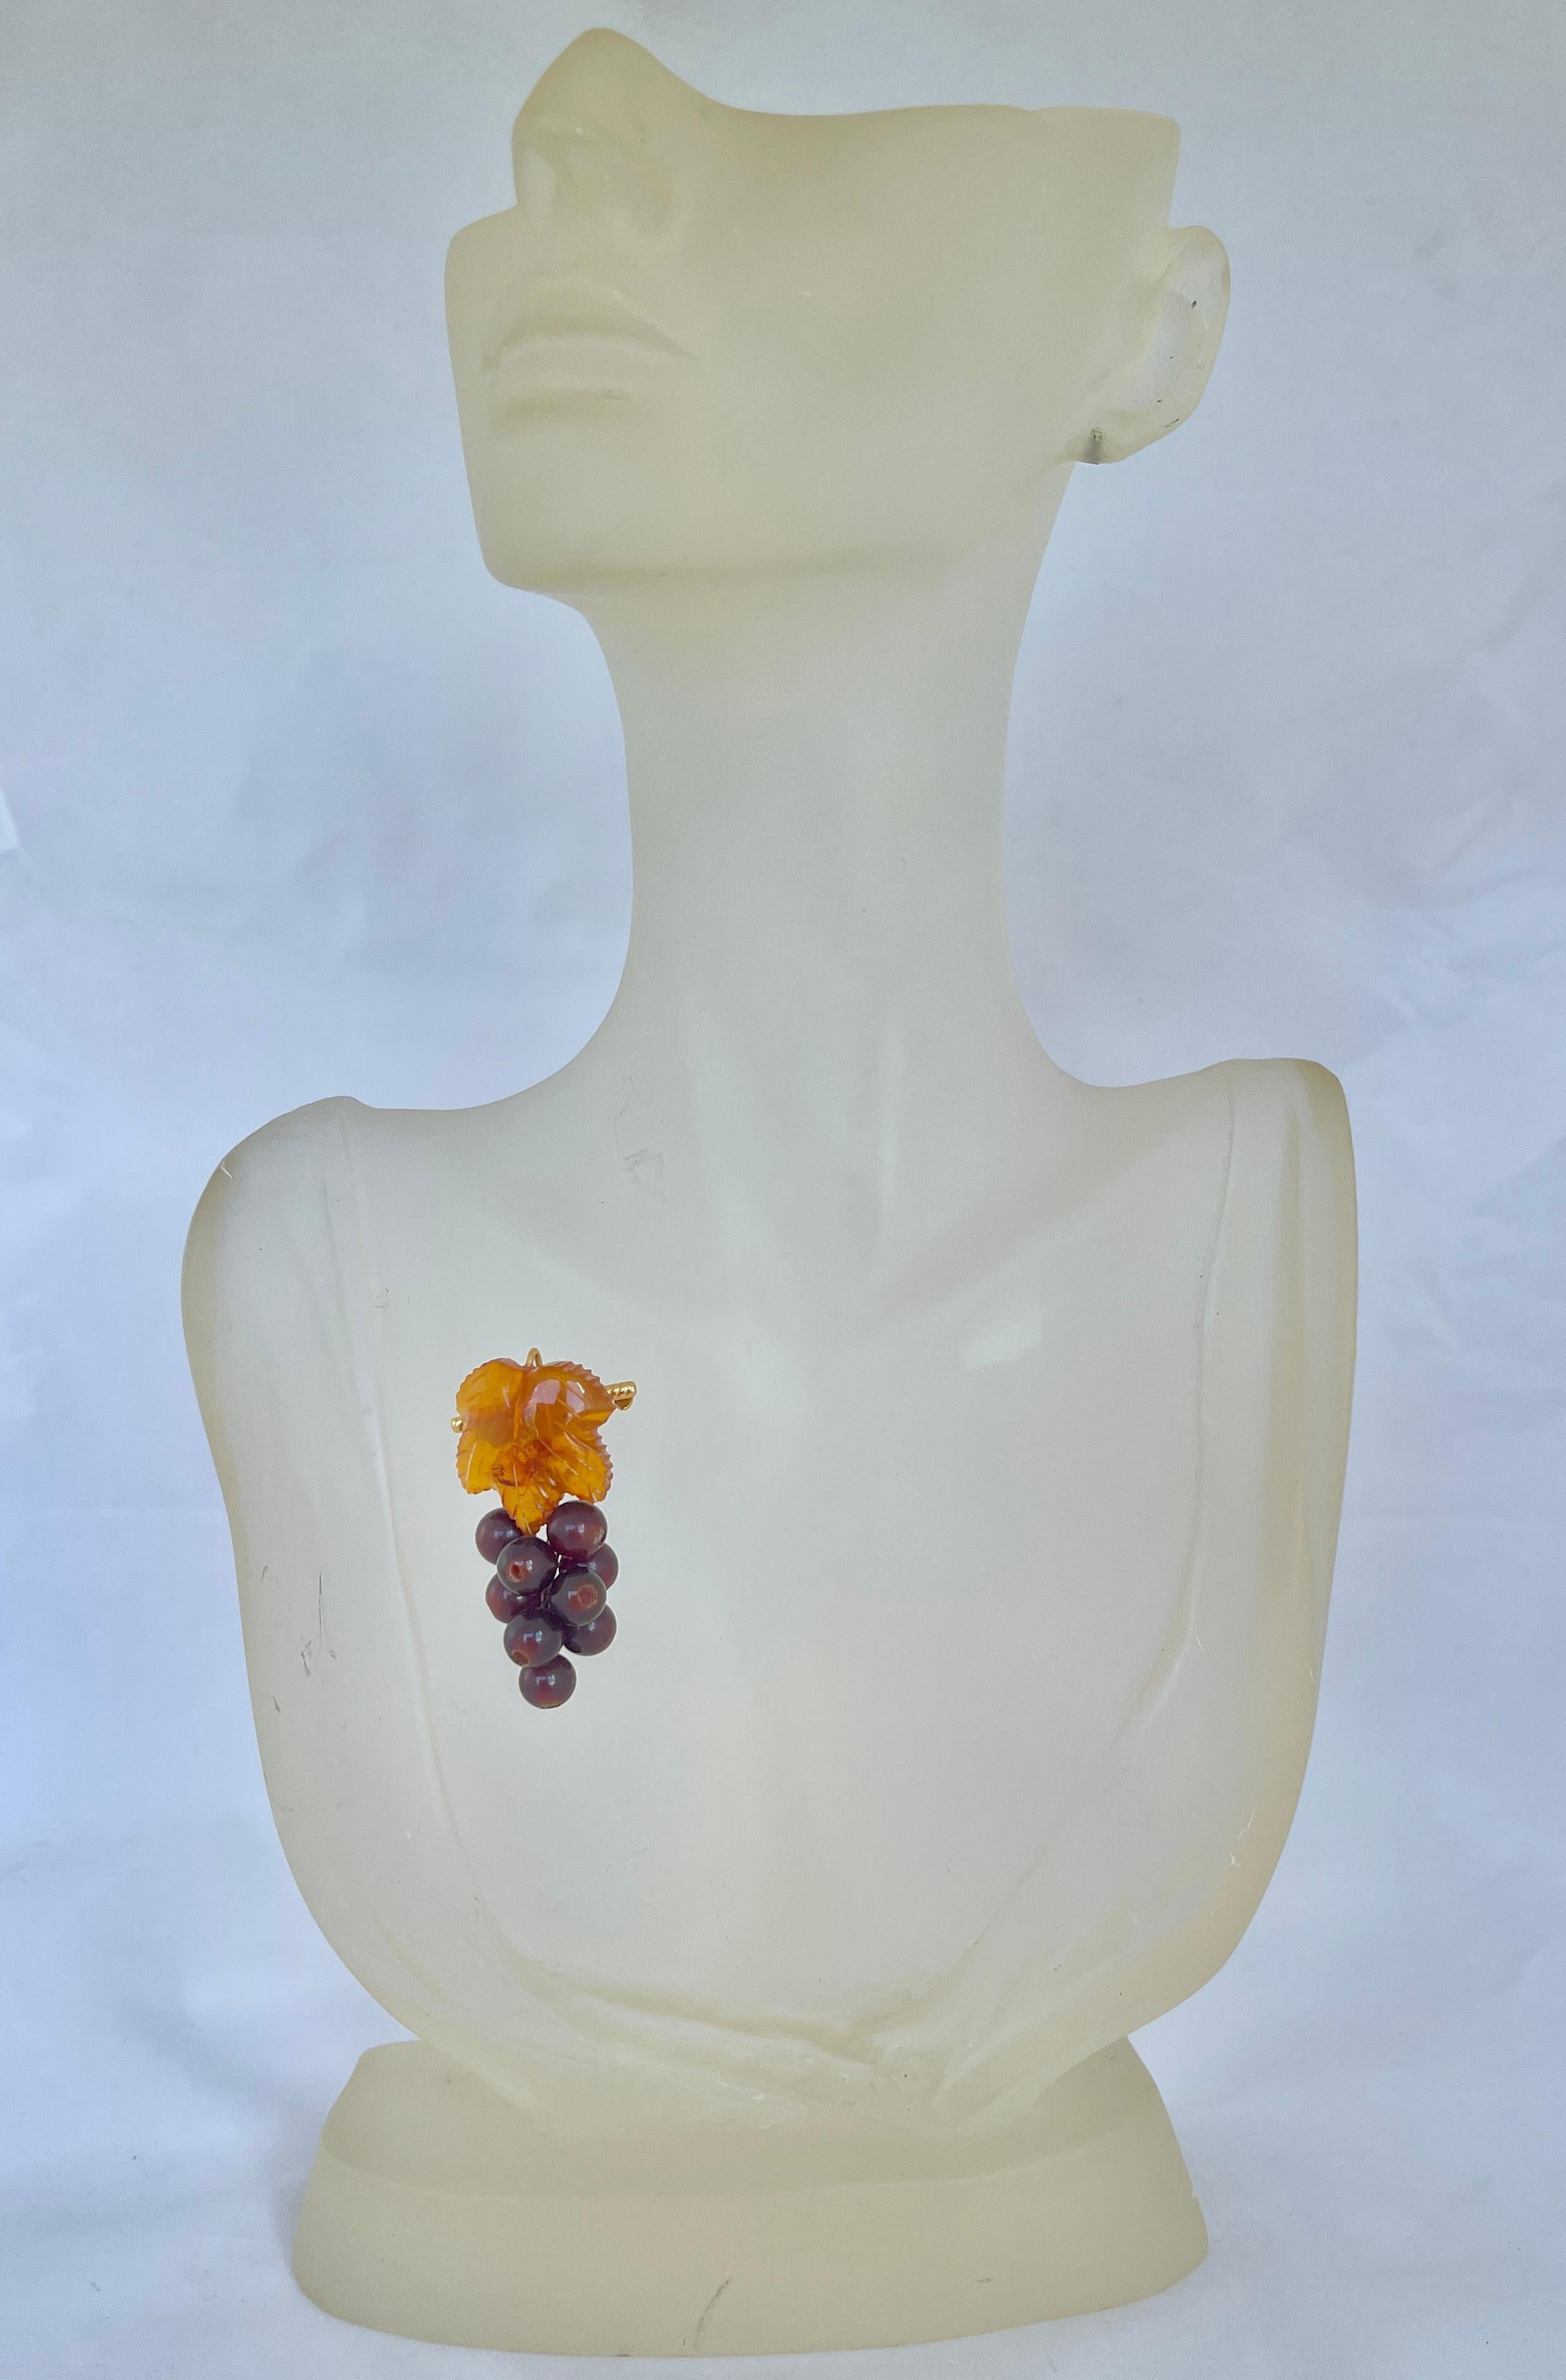 This is a beautiful, hand crafted vintage brooch from Russia with hallmarks.

The piece is crafted from genuine Baltic Amber with natural inclusions.  It features a yellowish-brown, carved leaf with a bunch of darker brown grapes that articulate